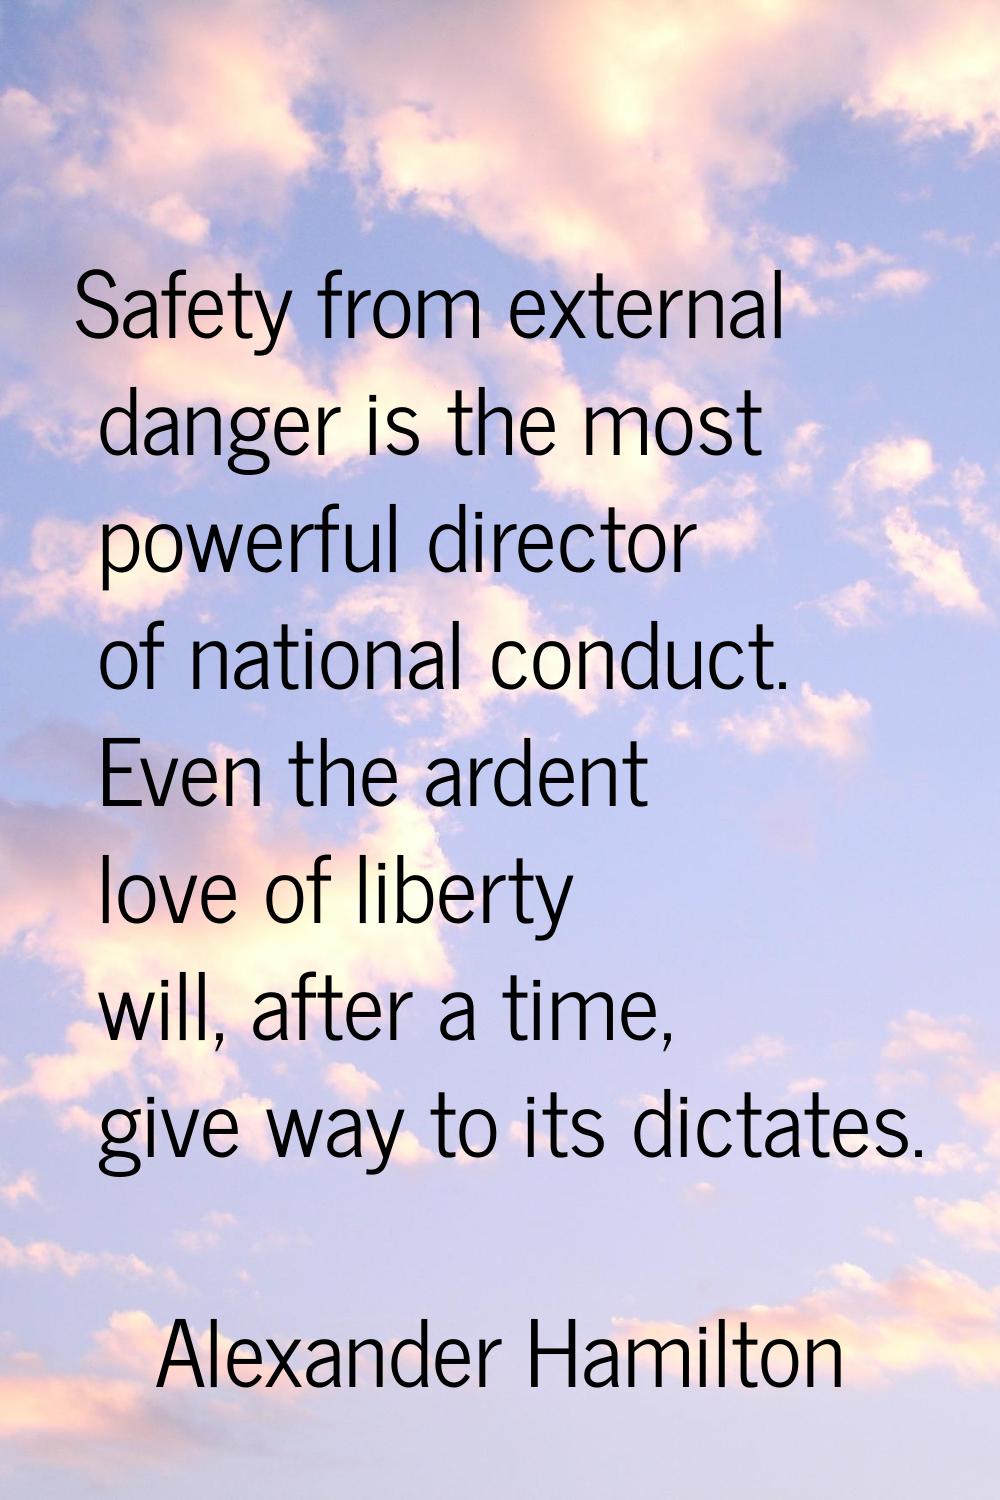 Safety from external danger is the most powerful director of national conduct. Even the ardent love